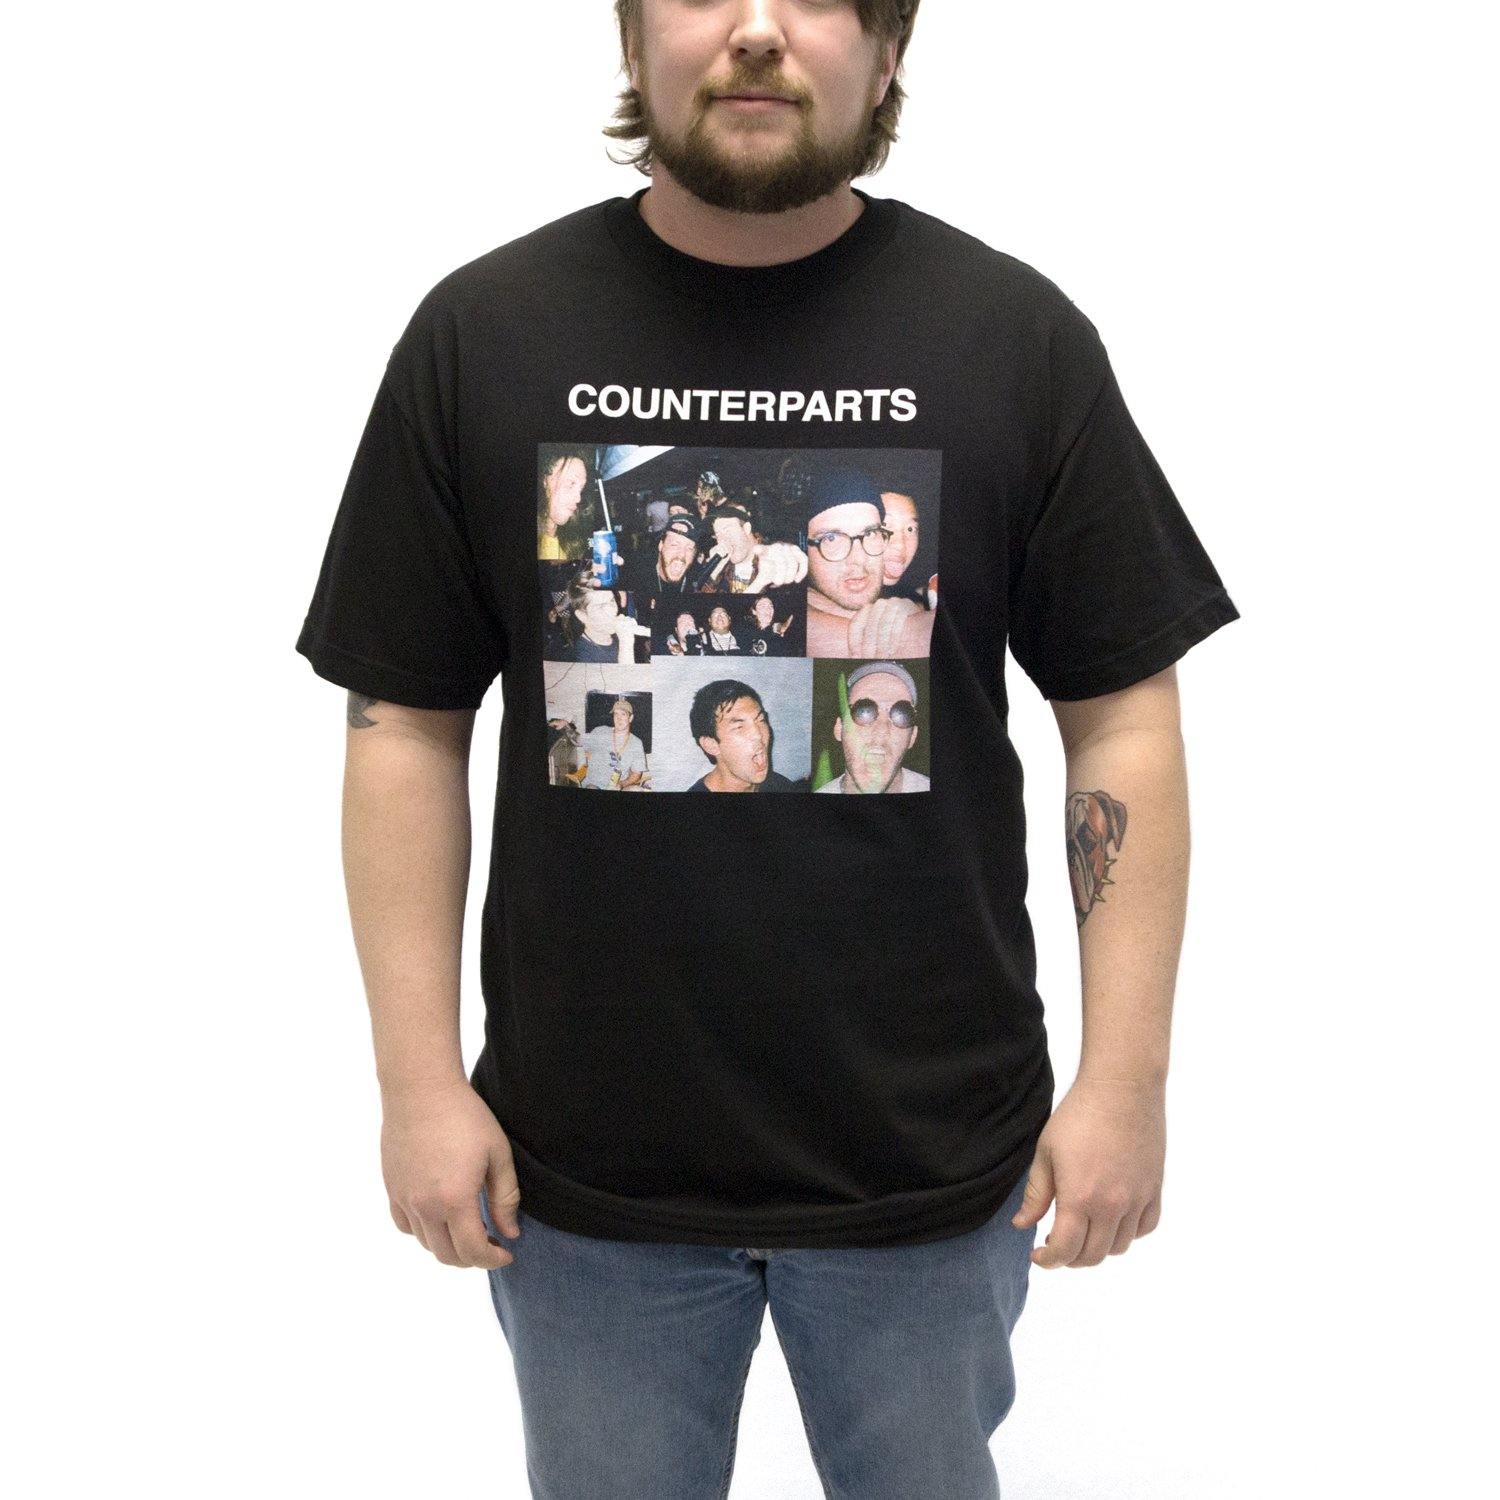 Buy – Counterparts "Collage" Shirt – Band & Music Merch – Cold Cuts Merch